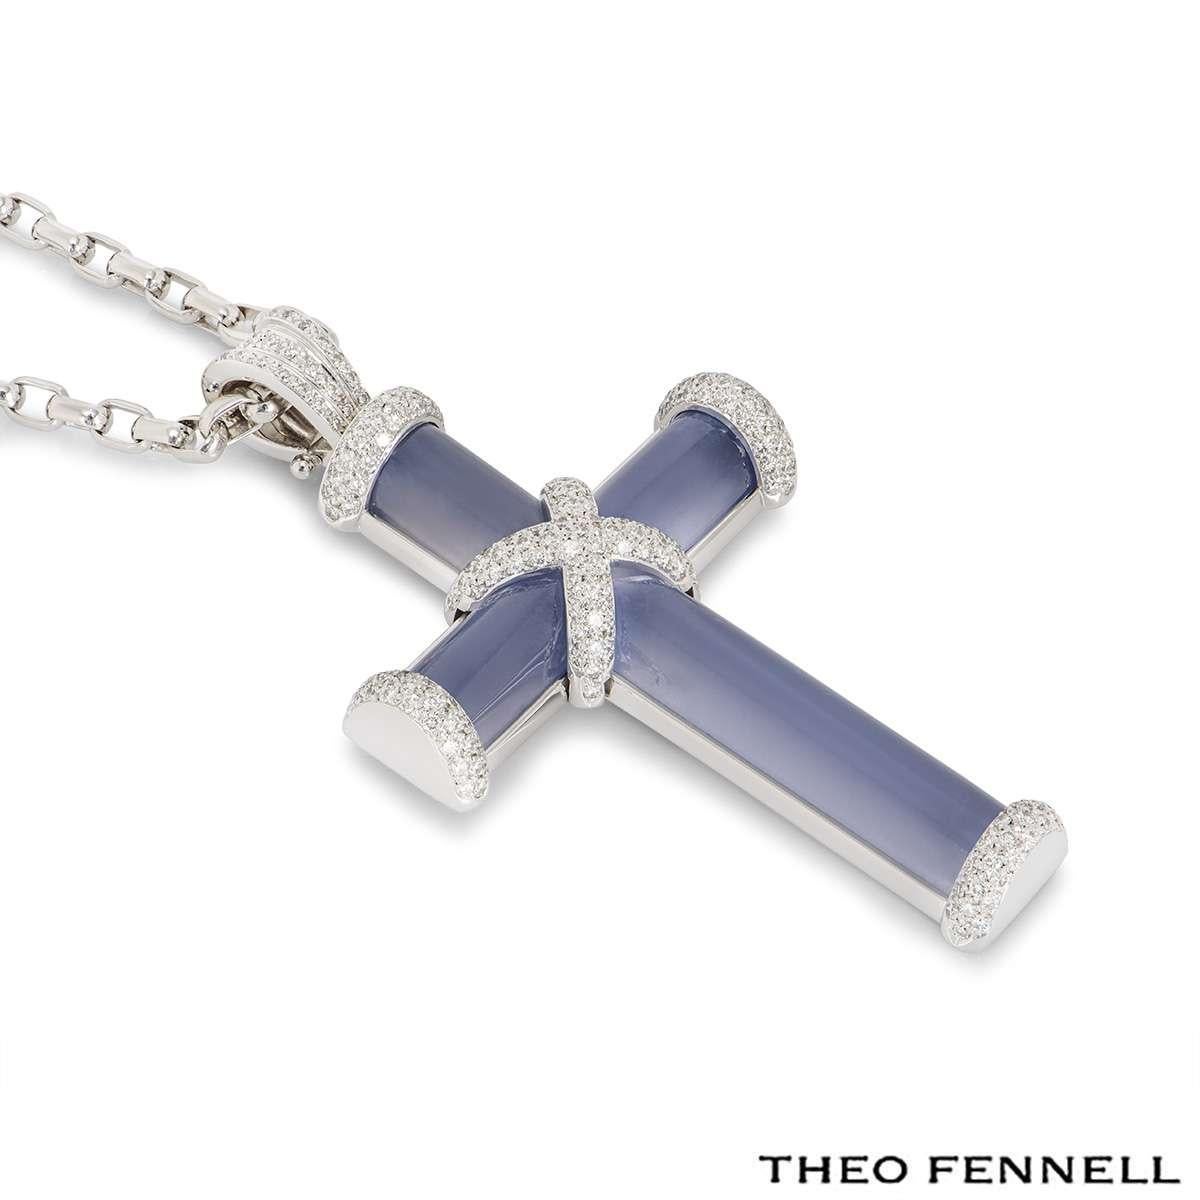 Round Cut Theo Fennell White Gold Cross Pendant